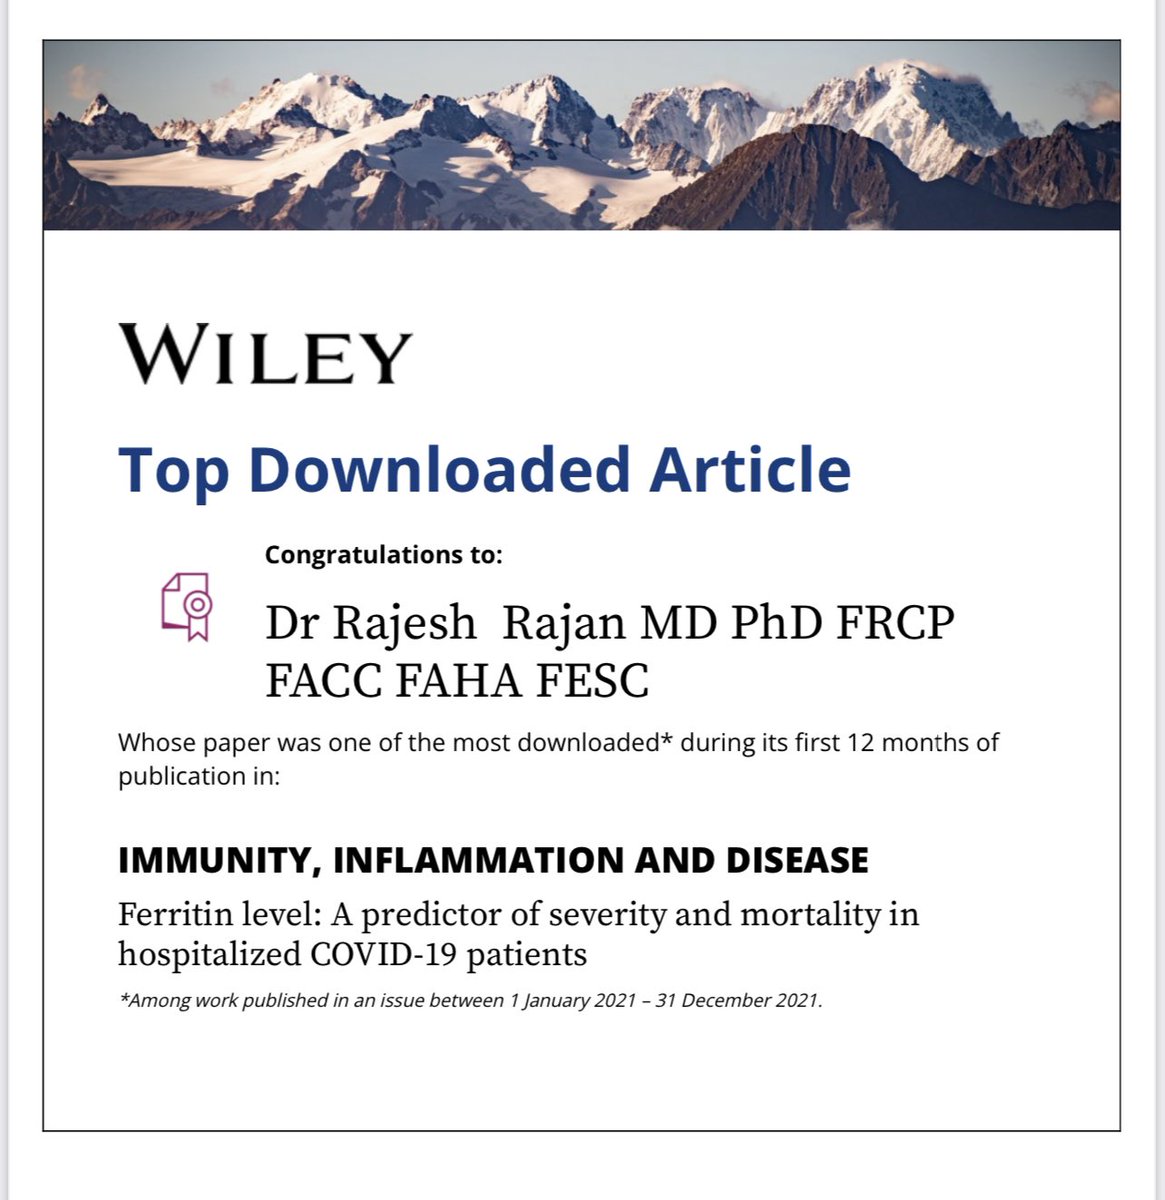 Good news! My article received enough downloads to be a #topdownloadedarticle in its journal.@WileyGlobal